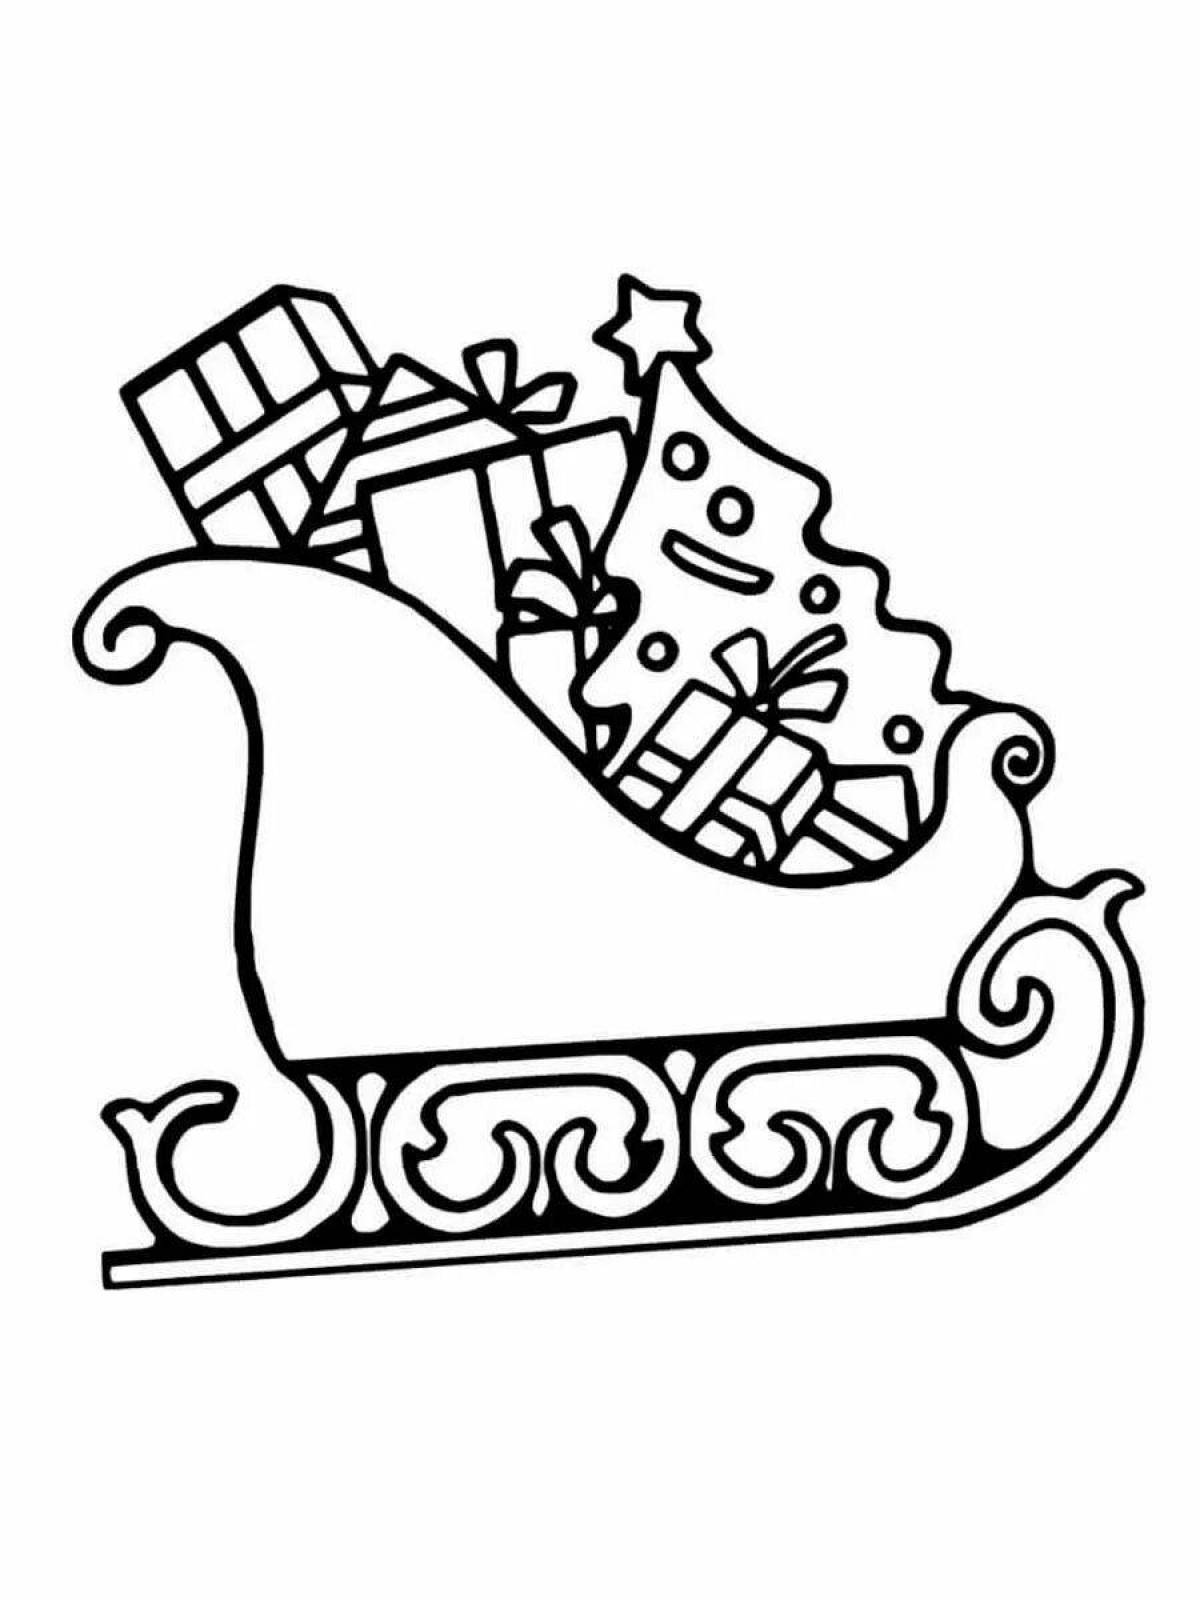 Shiny sleigh coloring pages for kids